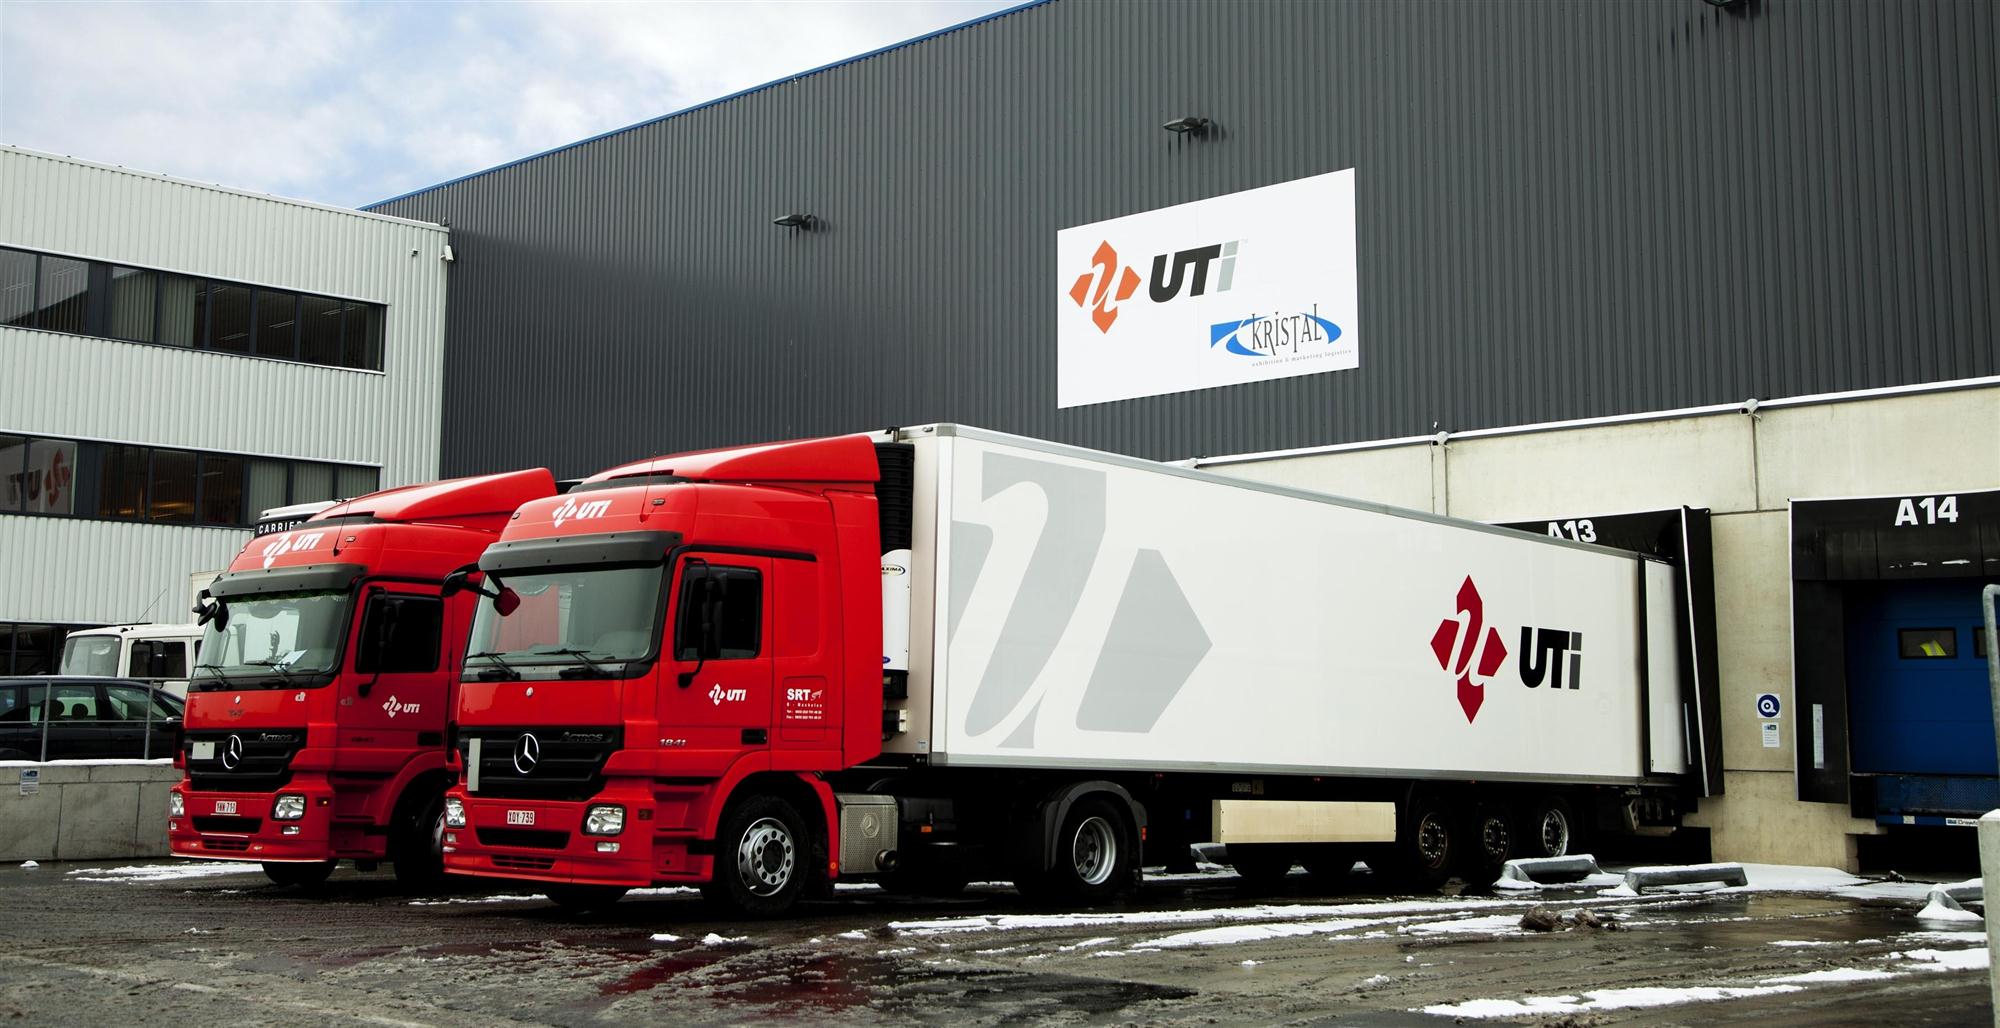 Self Photos / Files - UTi Worldwide has been acquired by DSV